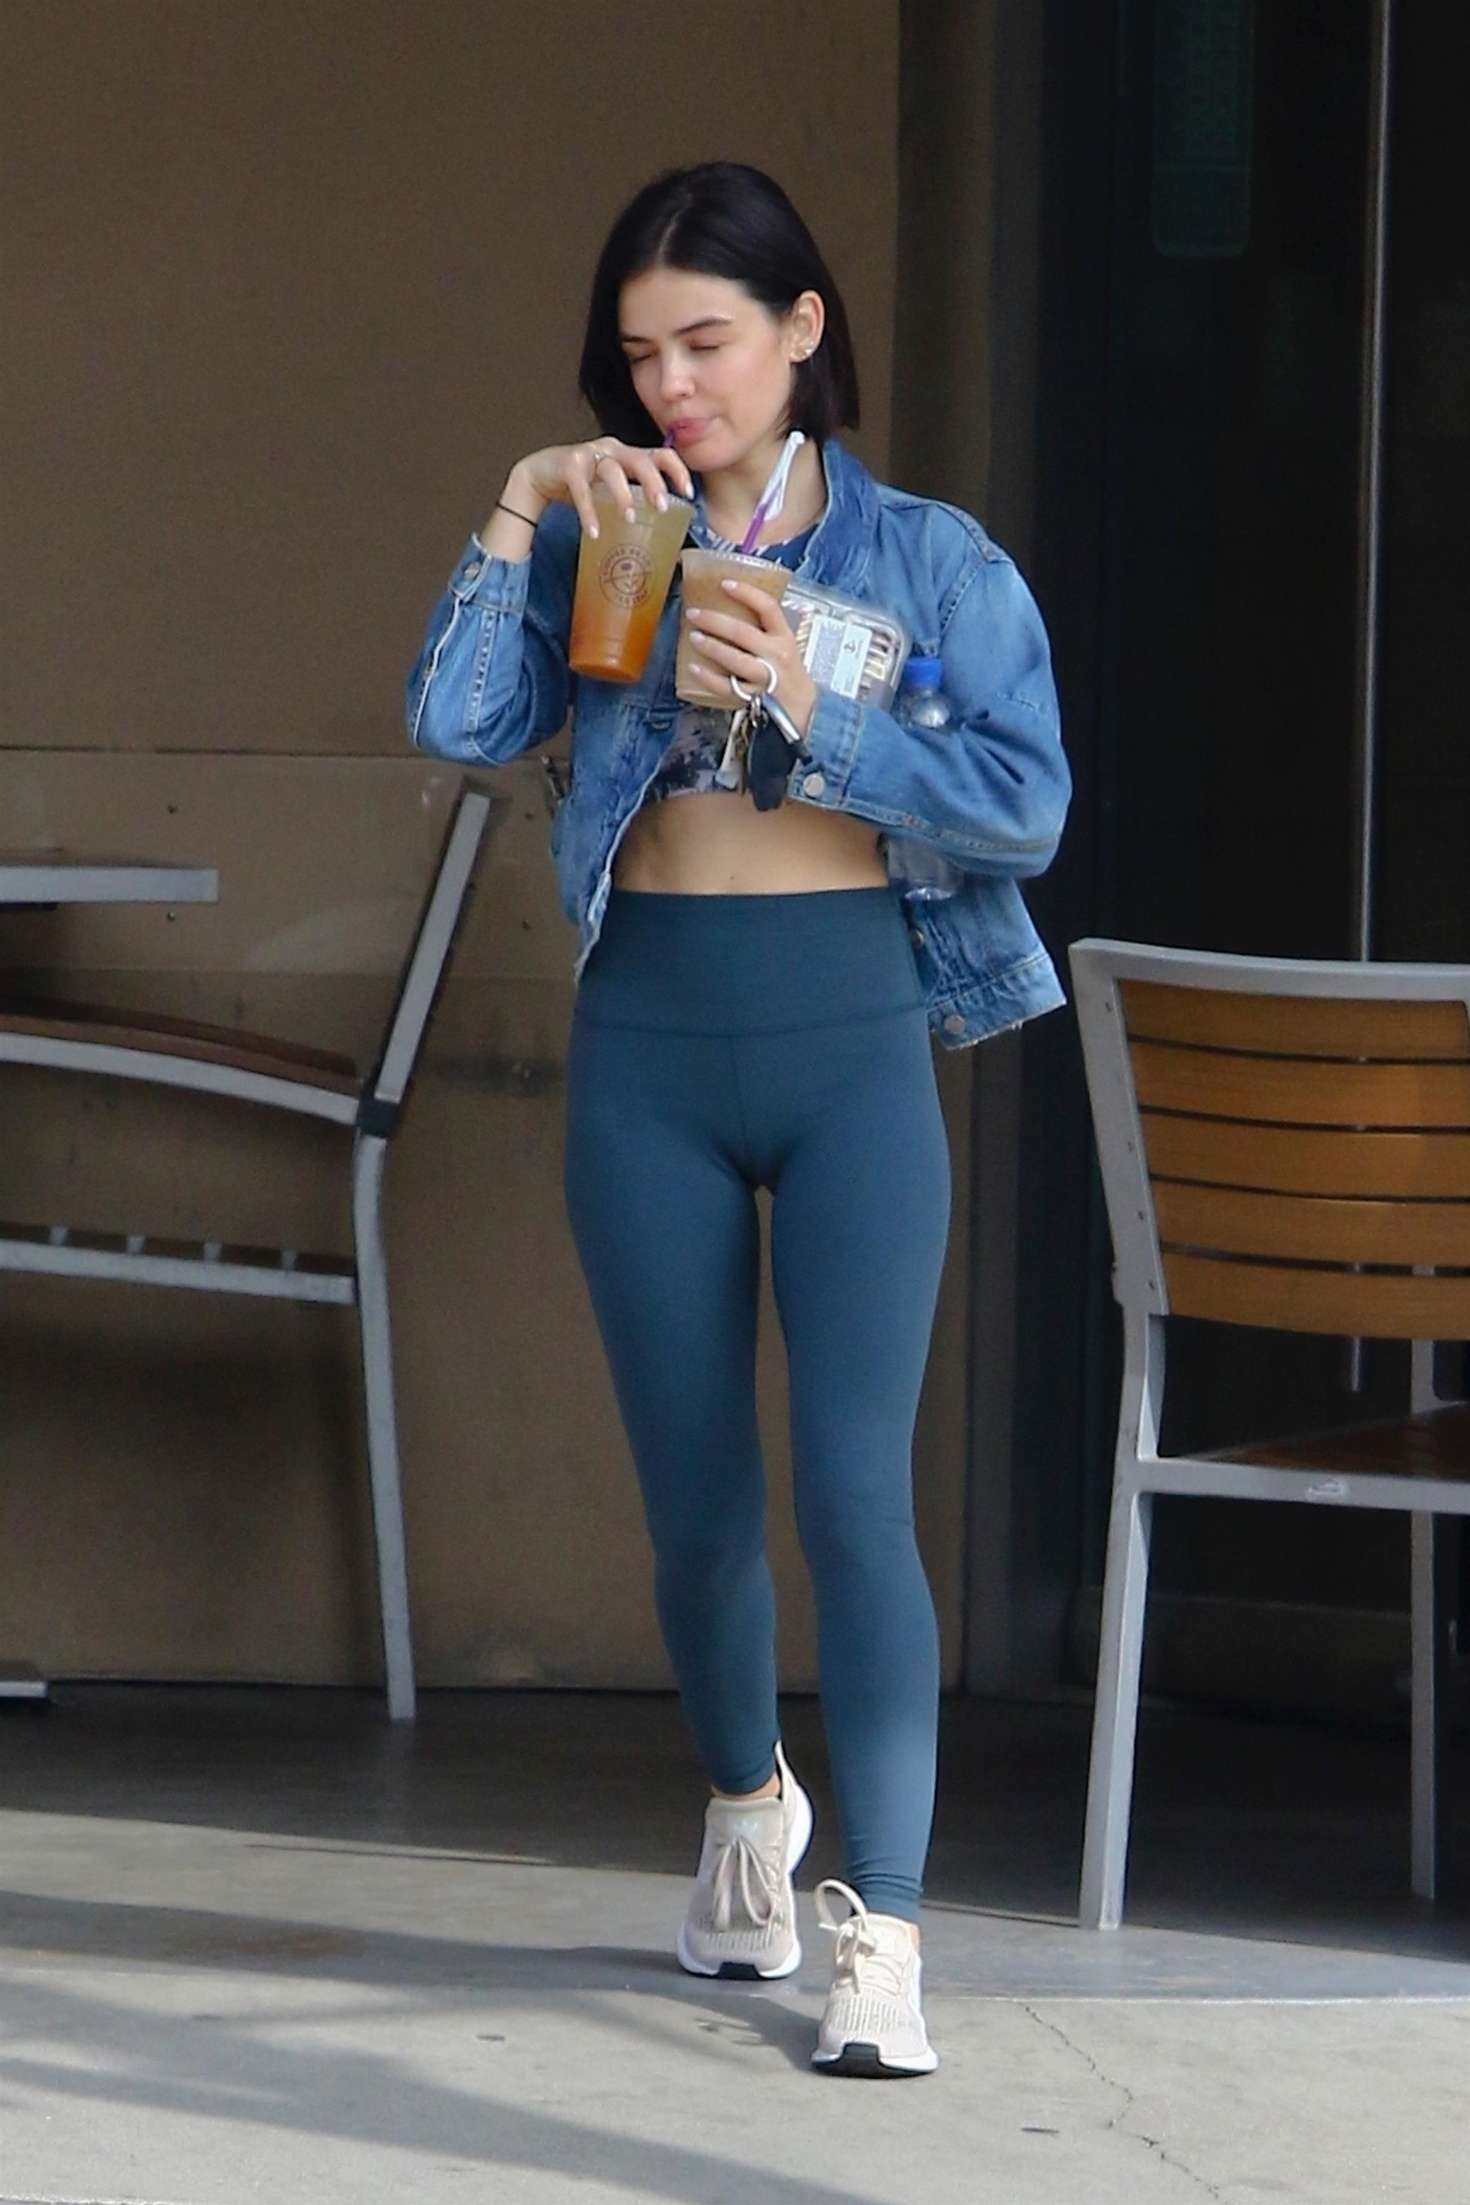 Lucy Hale in Tights â€“ Heads to the gym in Los Angerles